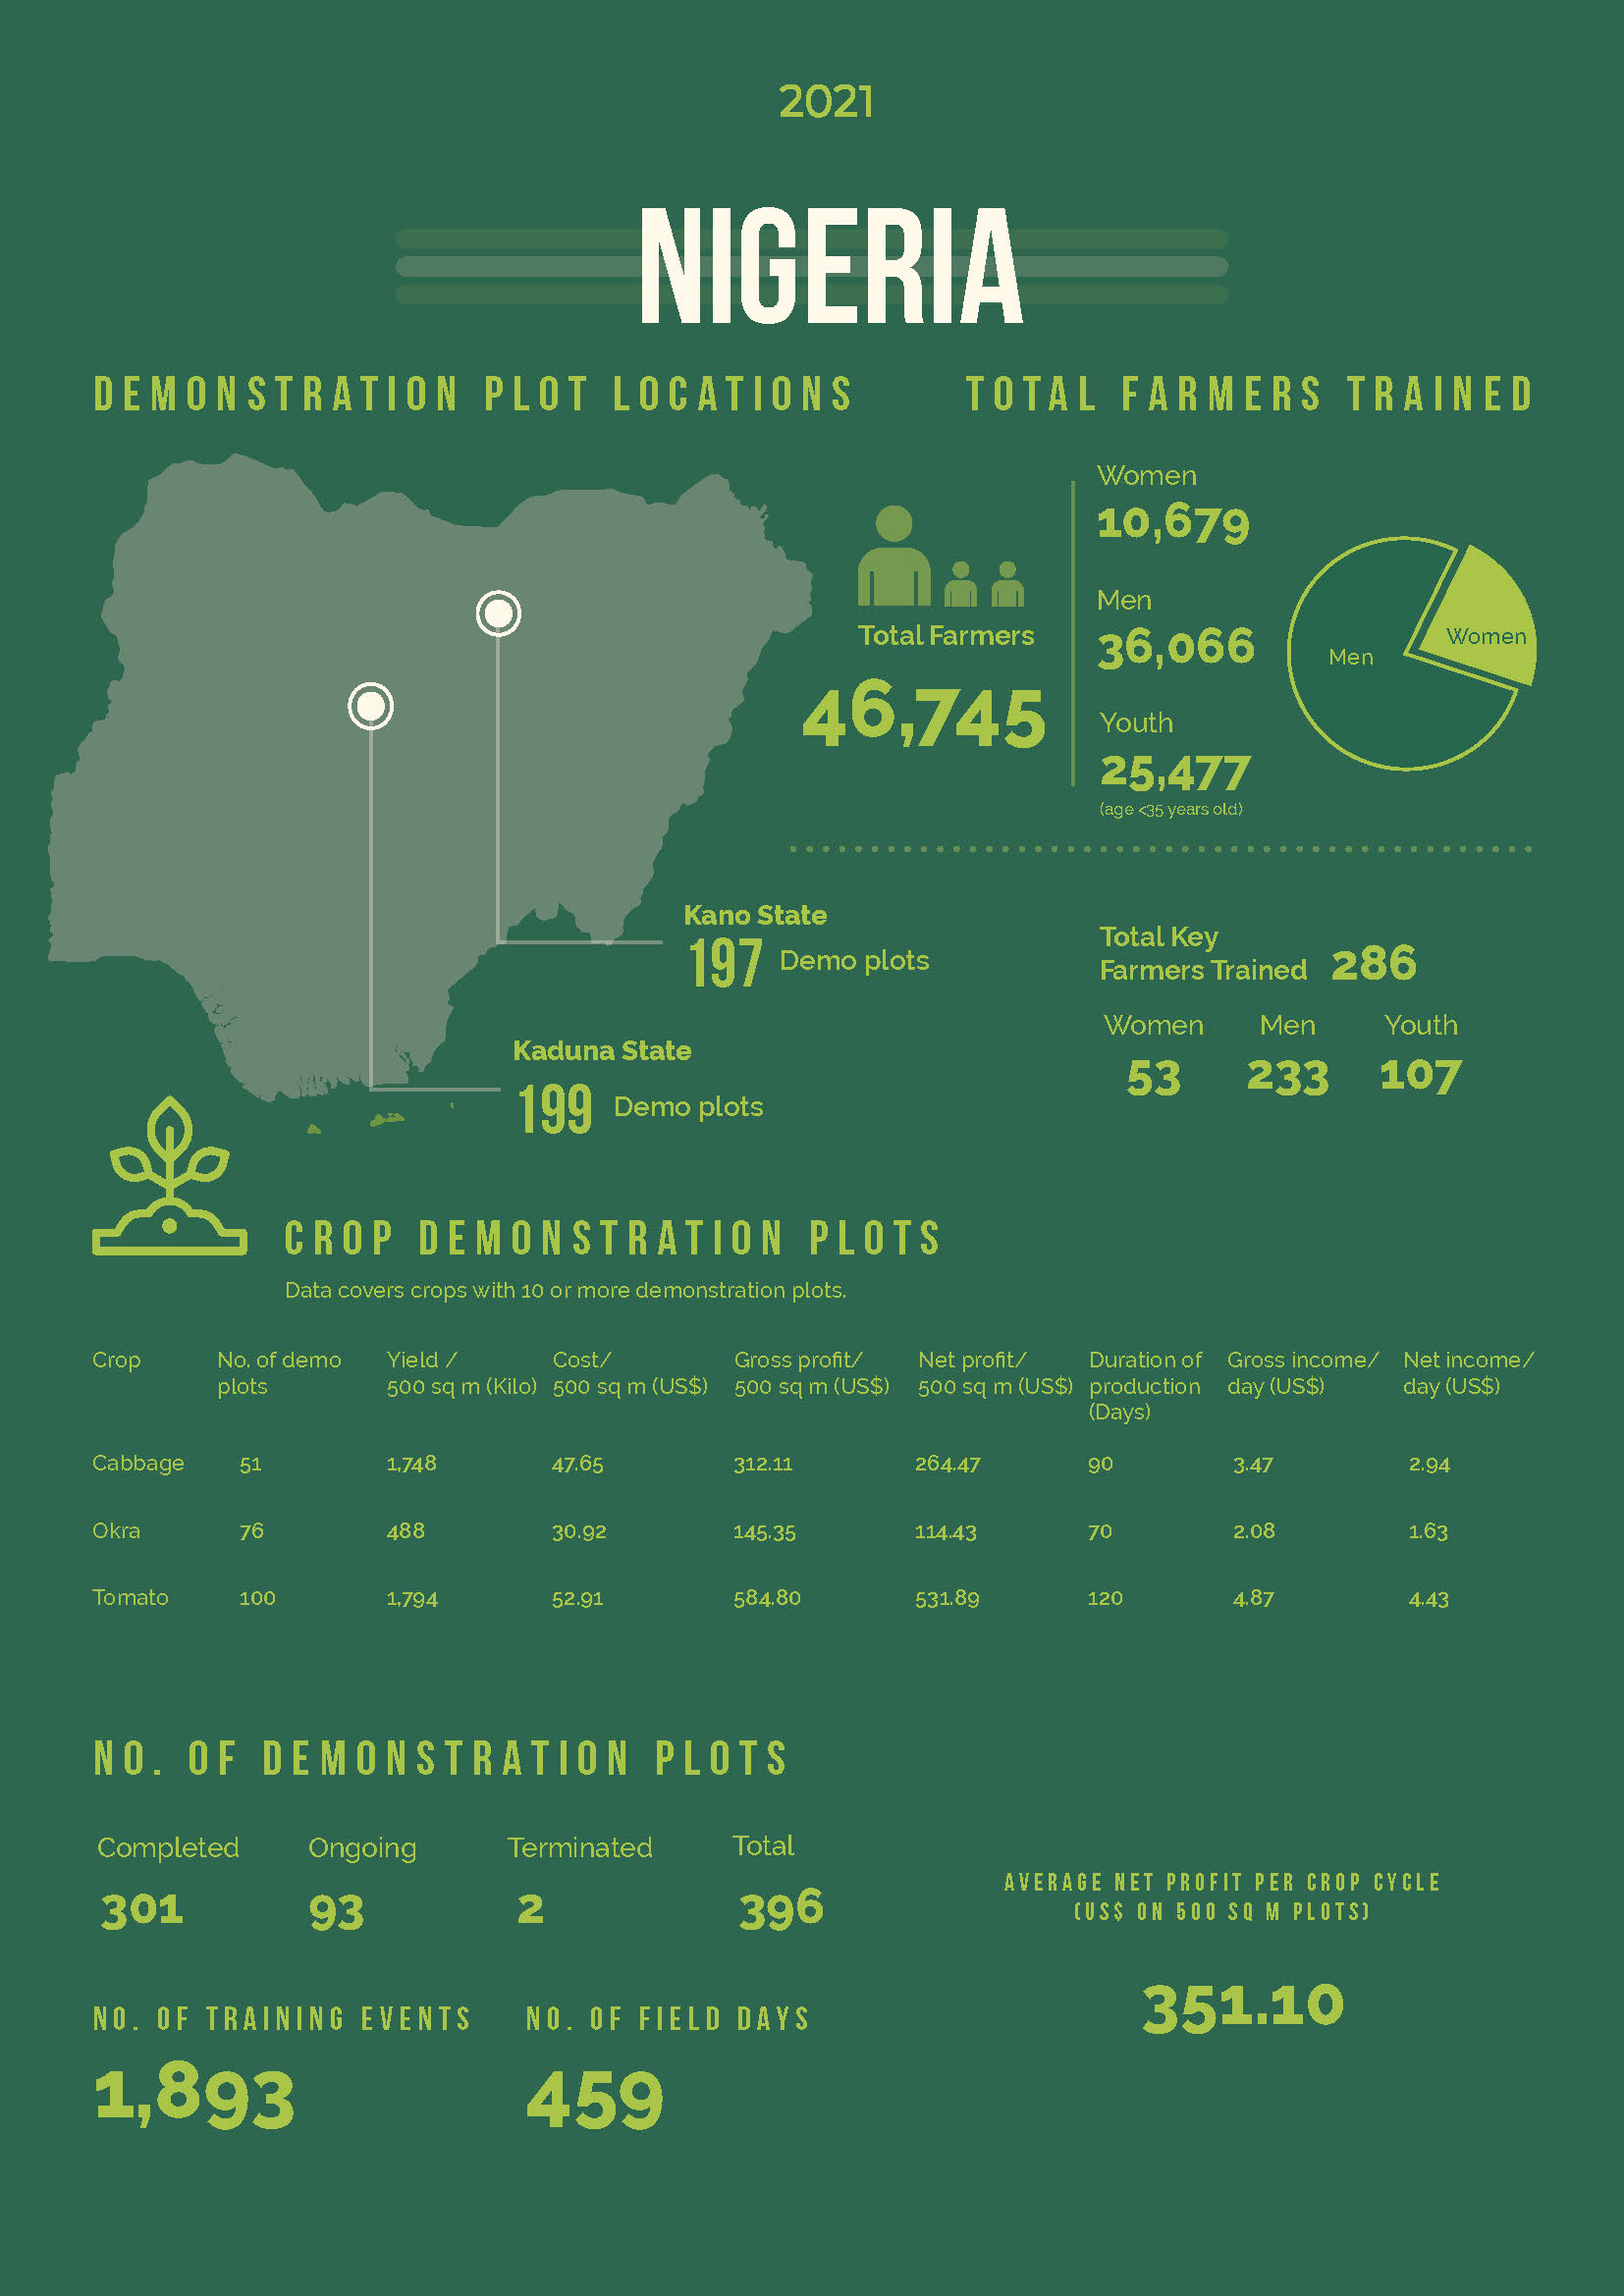 Image of Nigeria page in 2021 Annual Report